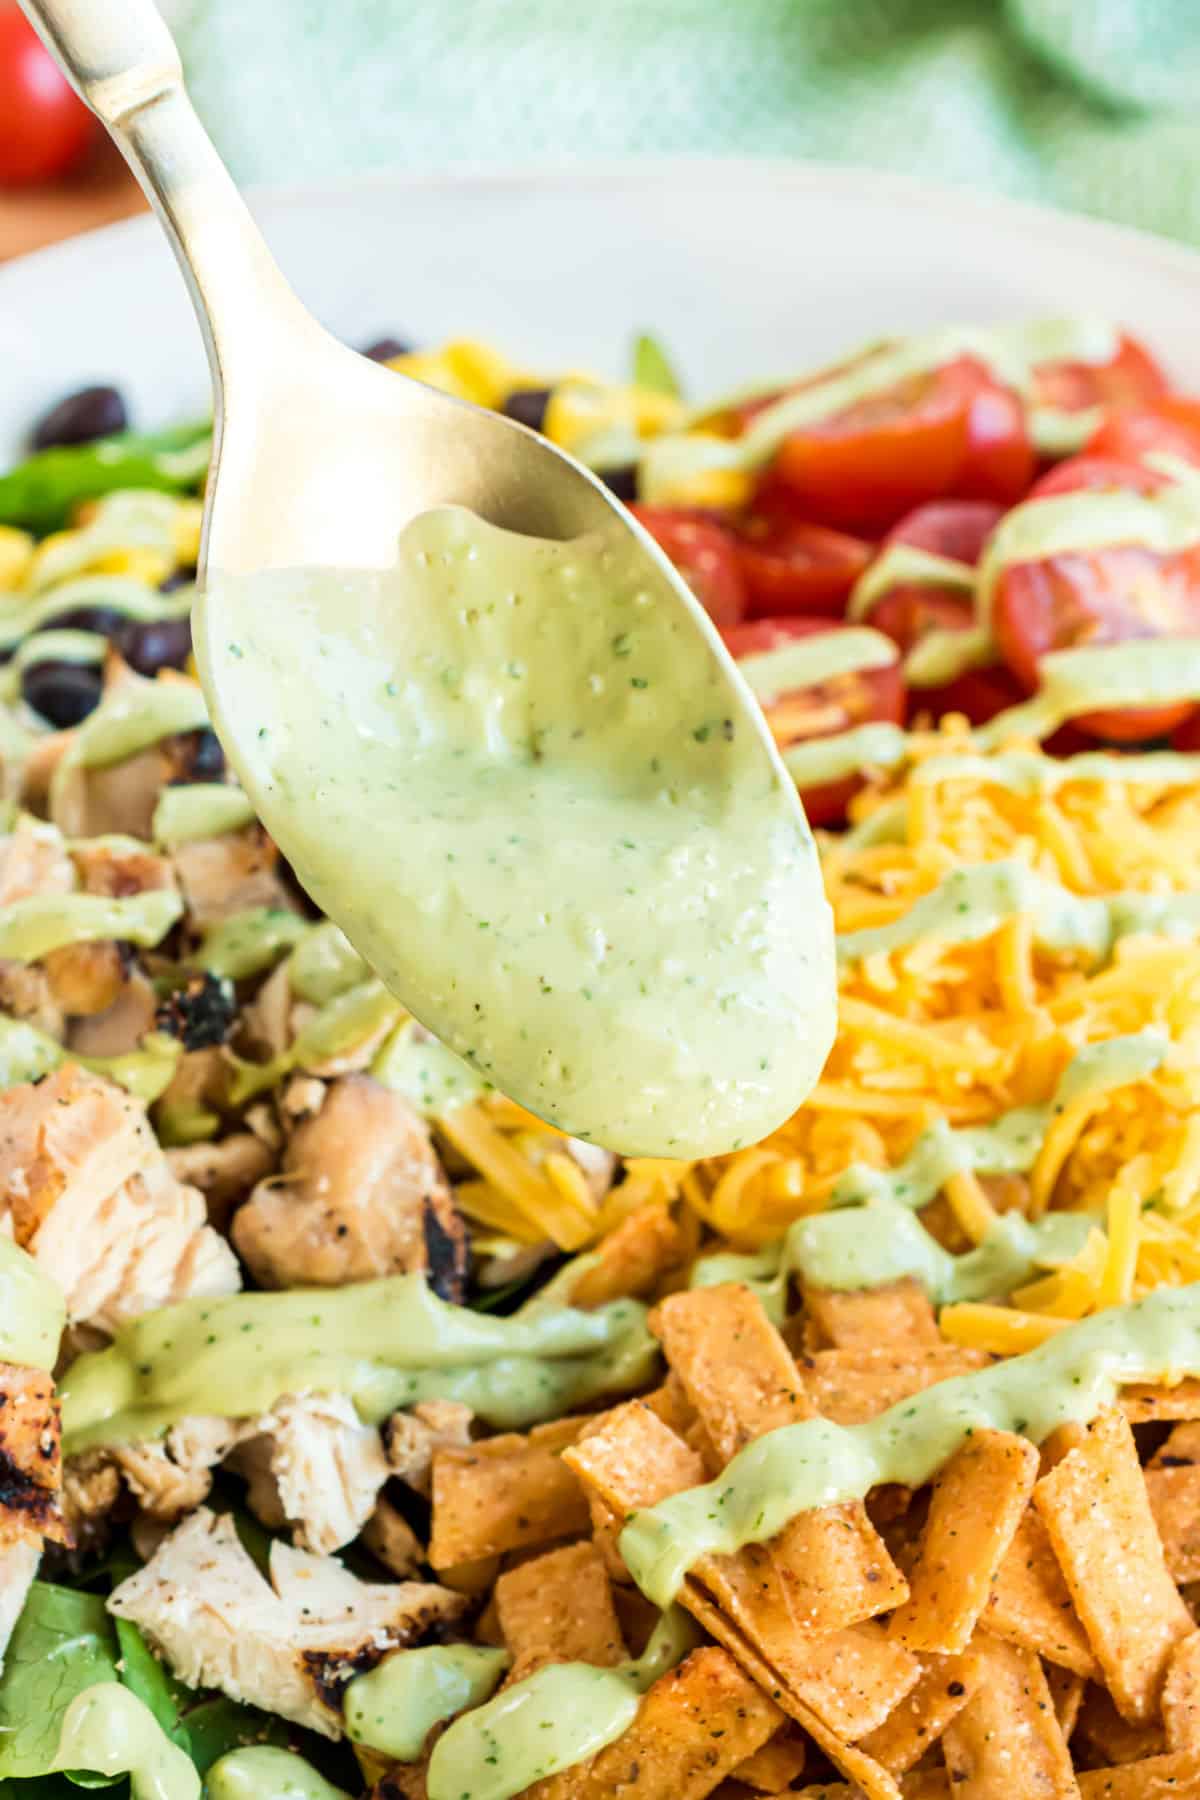 Avocado salad dressing drizzled over a southwest chicken salad.